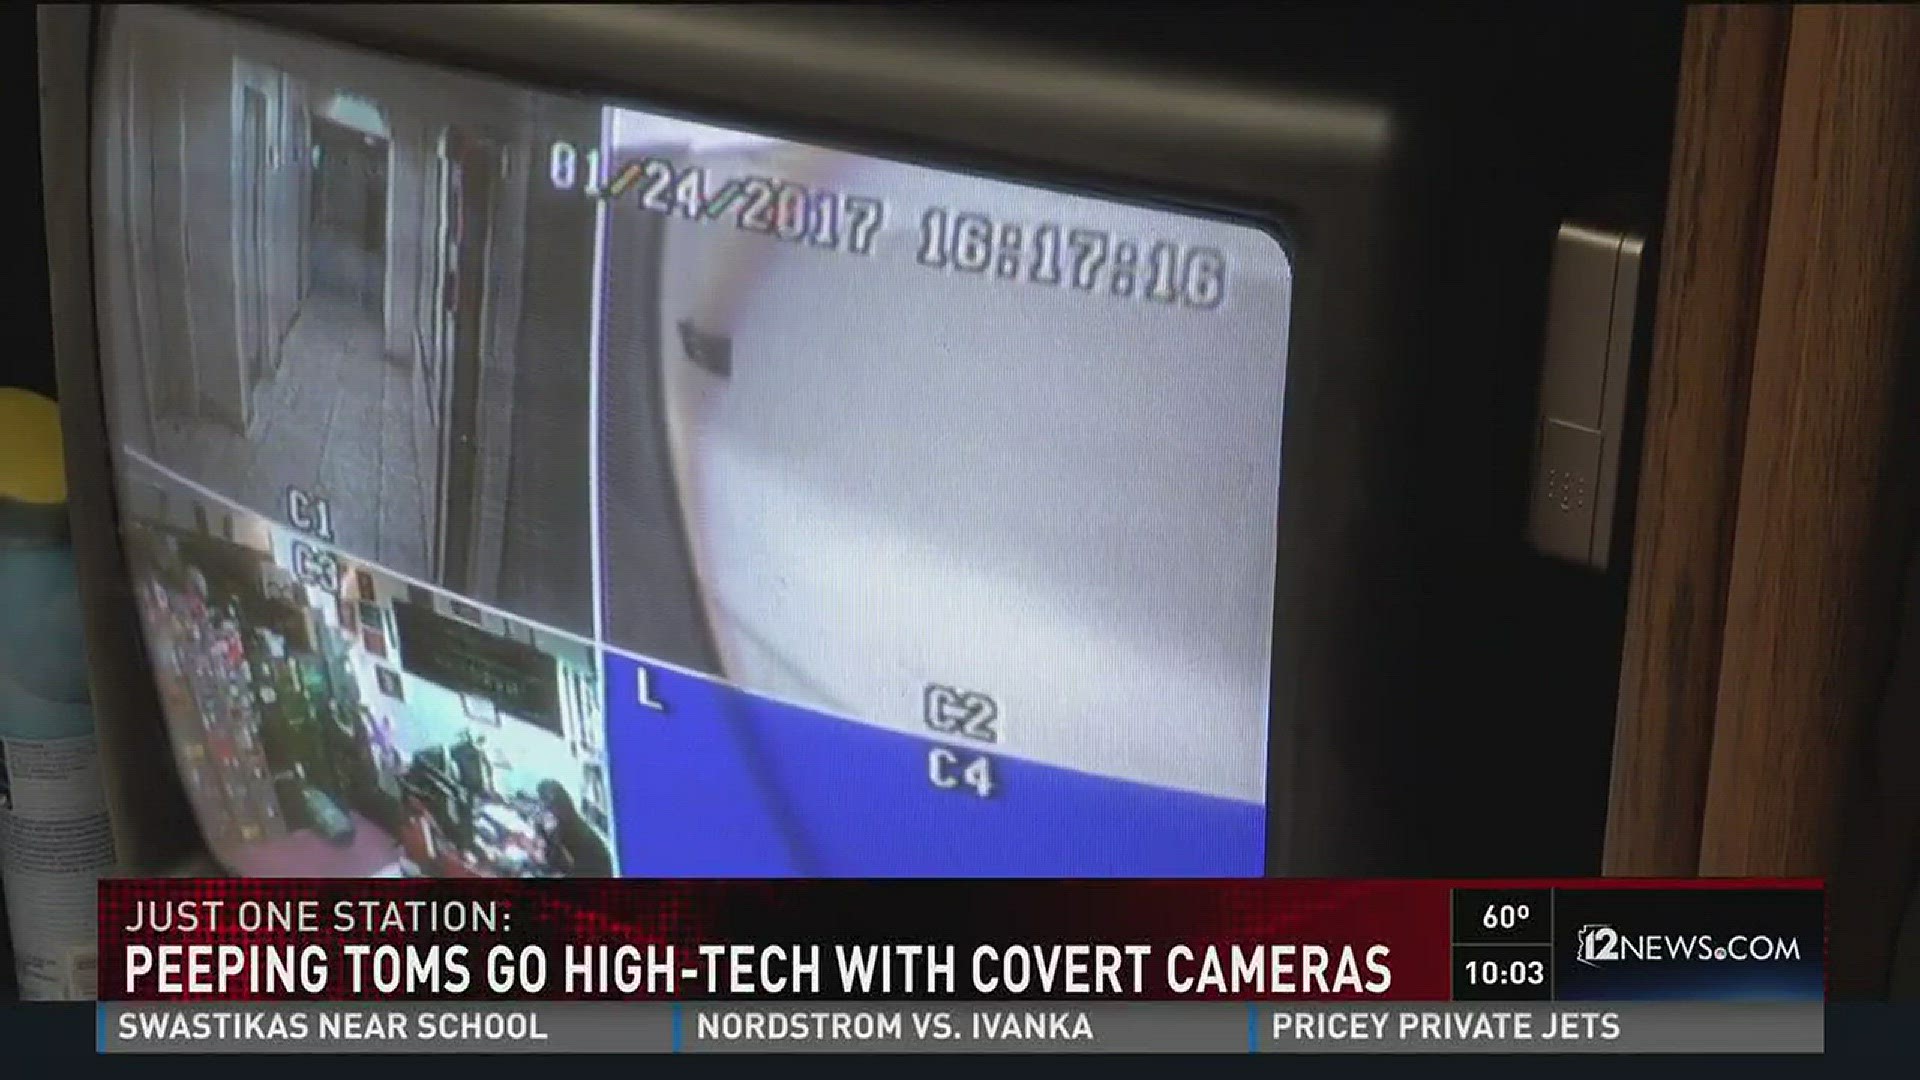 You would never know it was there Peeping Toms go high-tech with covert cameras 12news